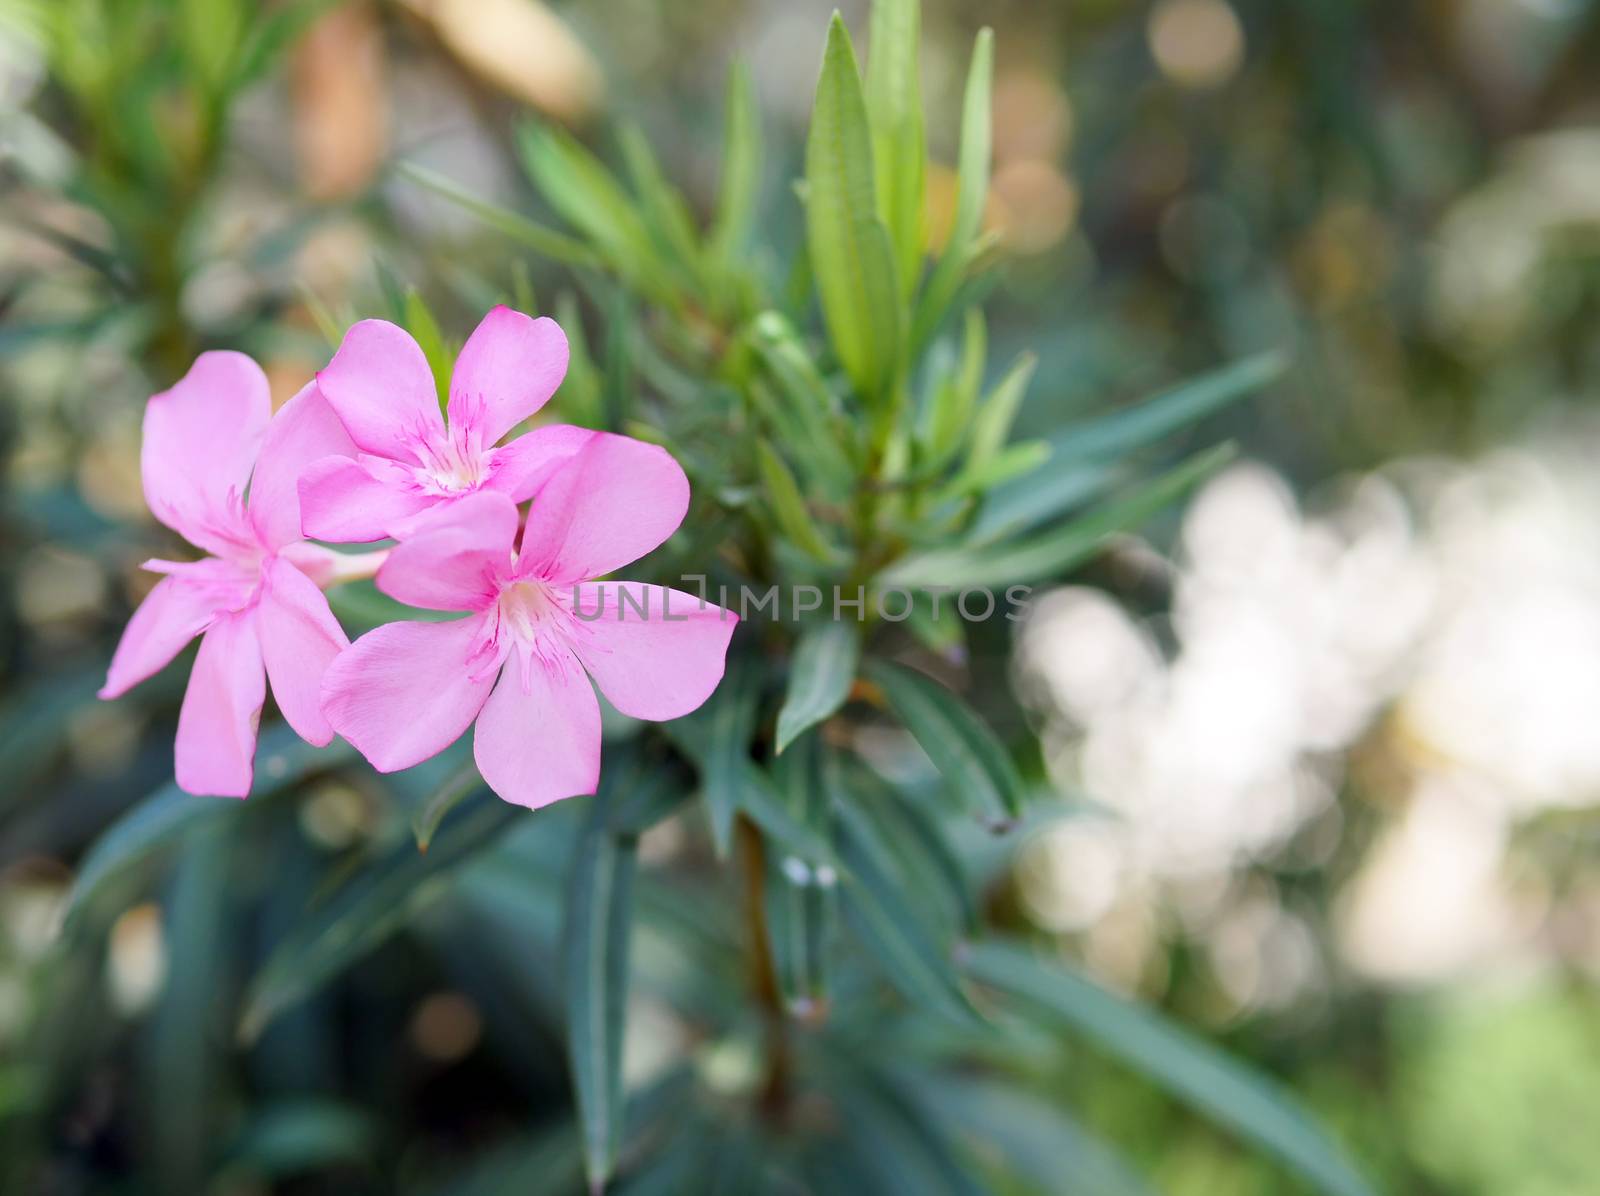 Oleander (Nerium oleander) is an evergreen shrub or small tree that is prized by home gardeners for its showy, funnel-shaped blooms